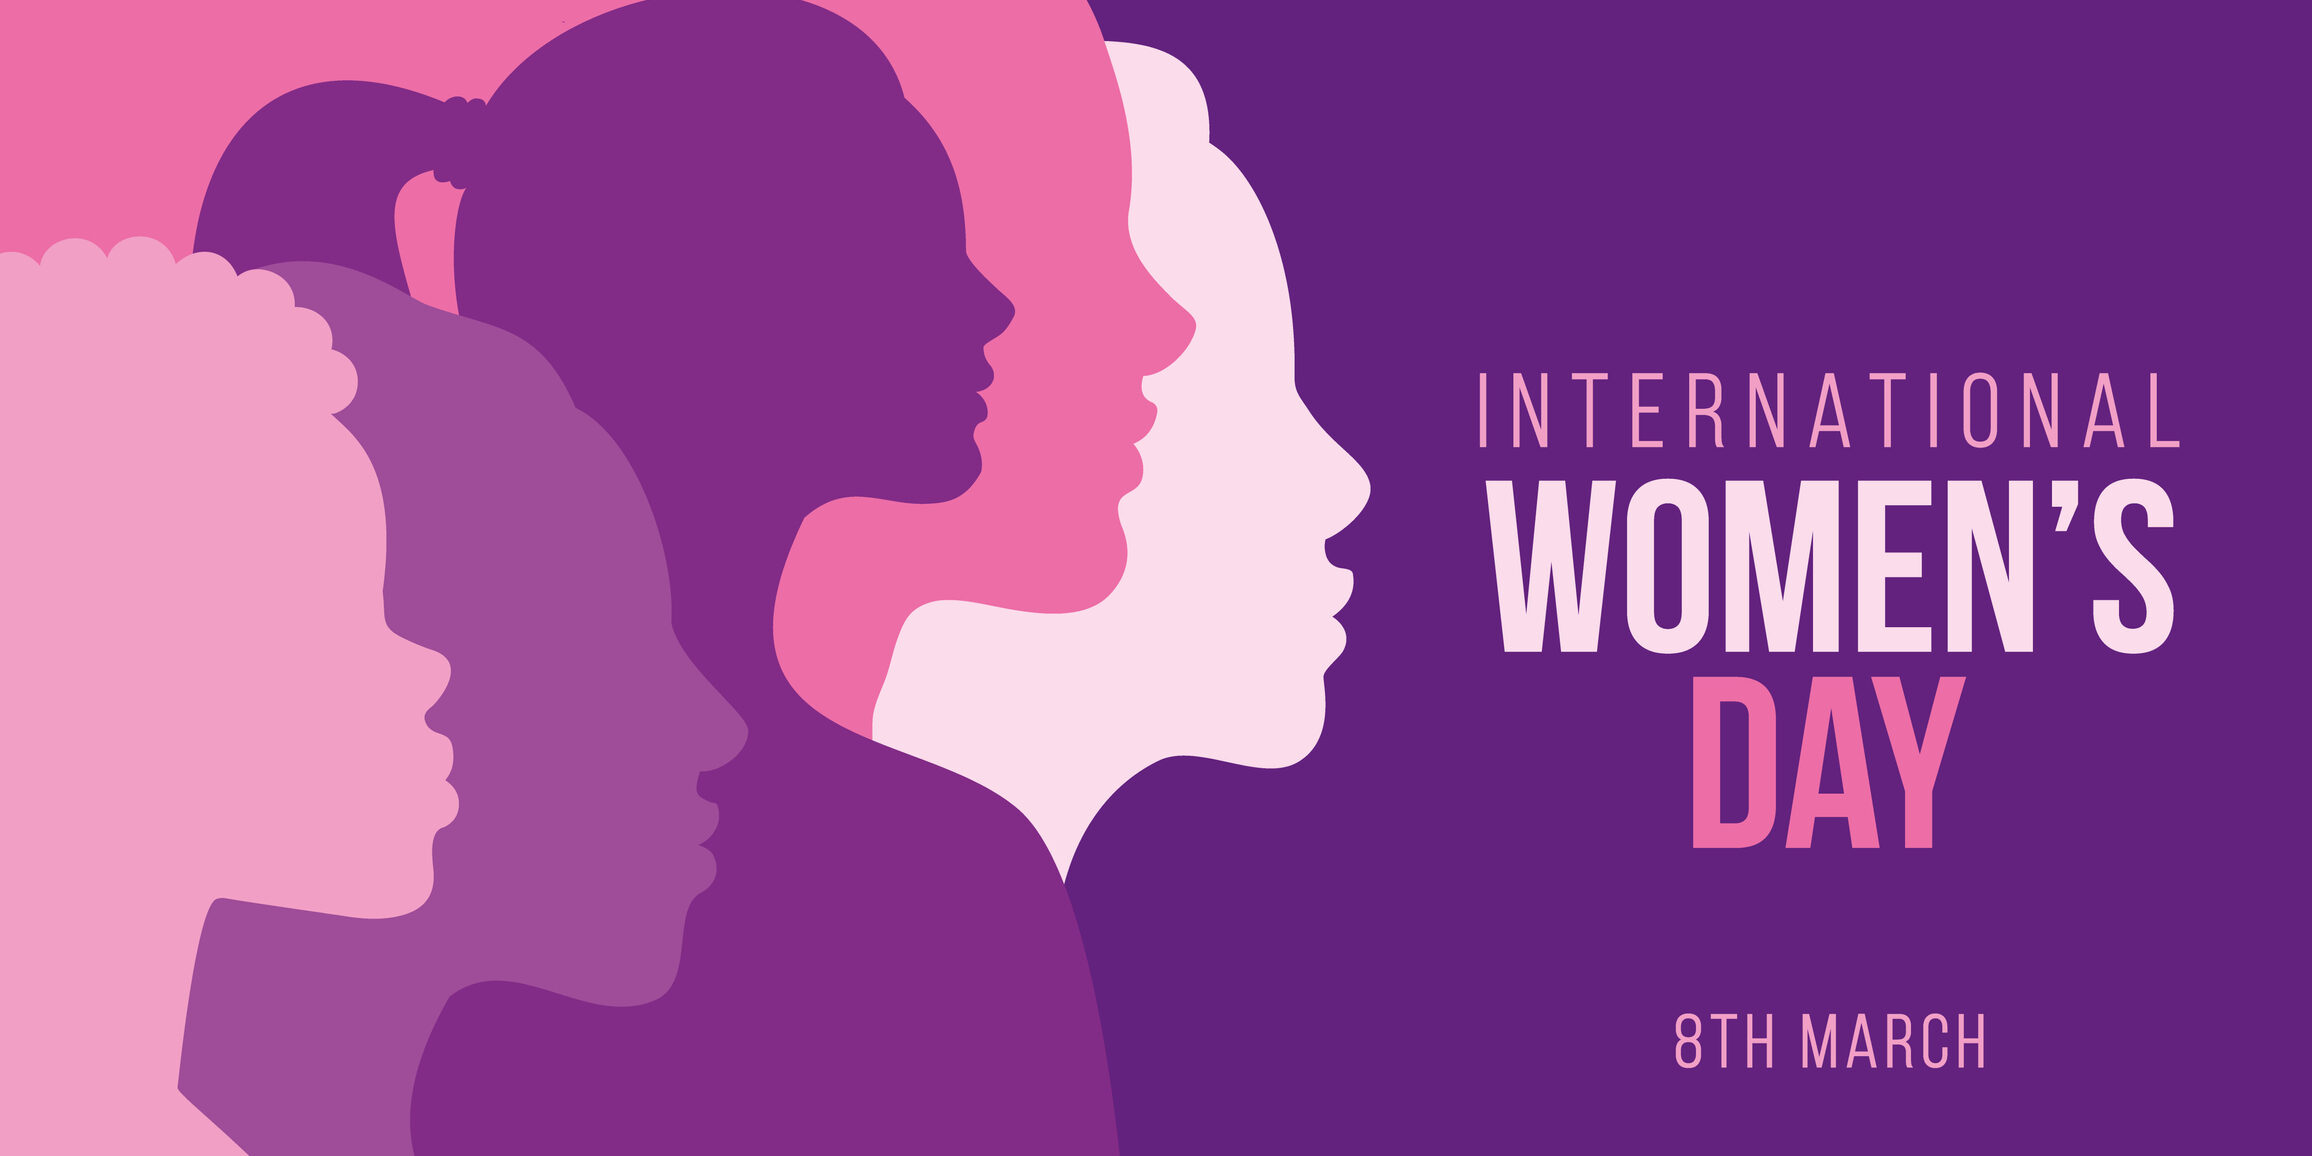 International Women's Day banner design featuring multicultural women's profile silhouettes. Landscape format.